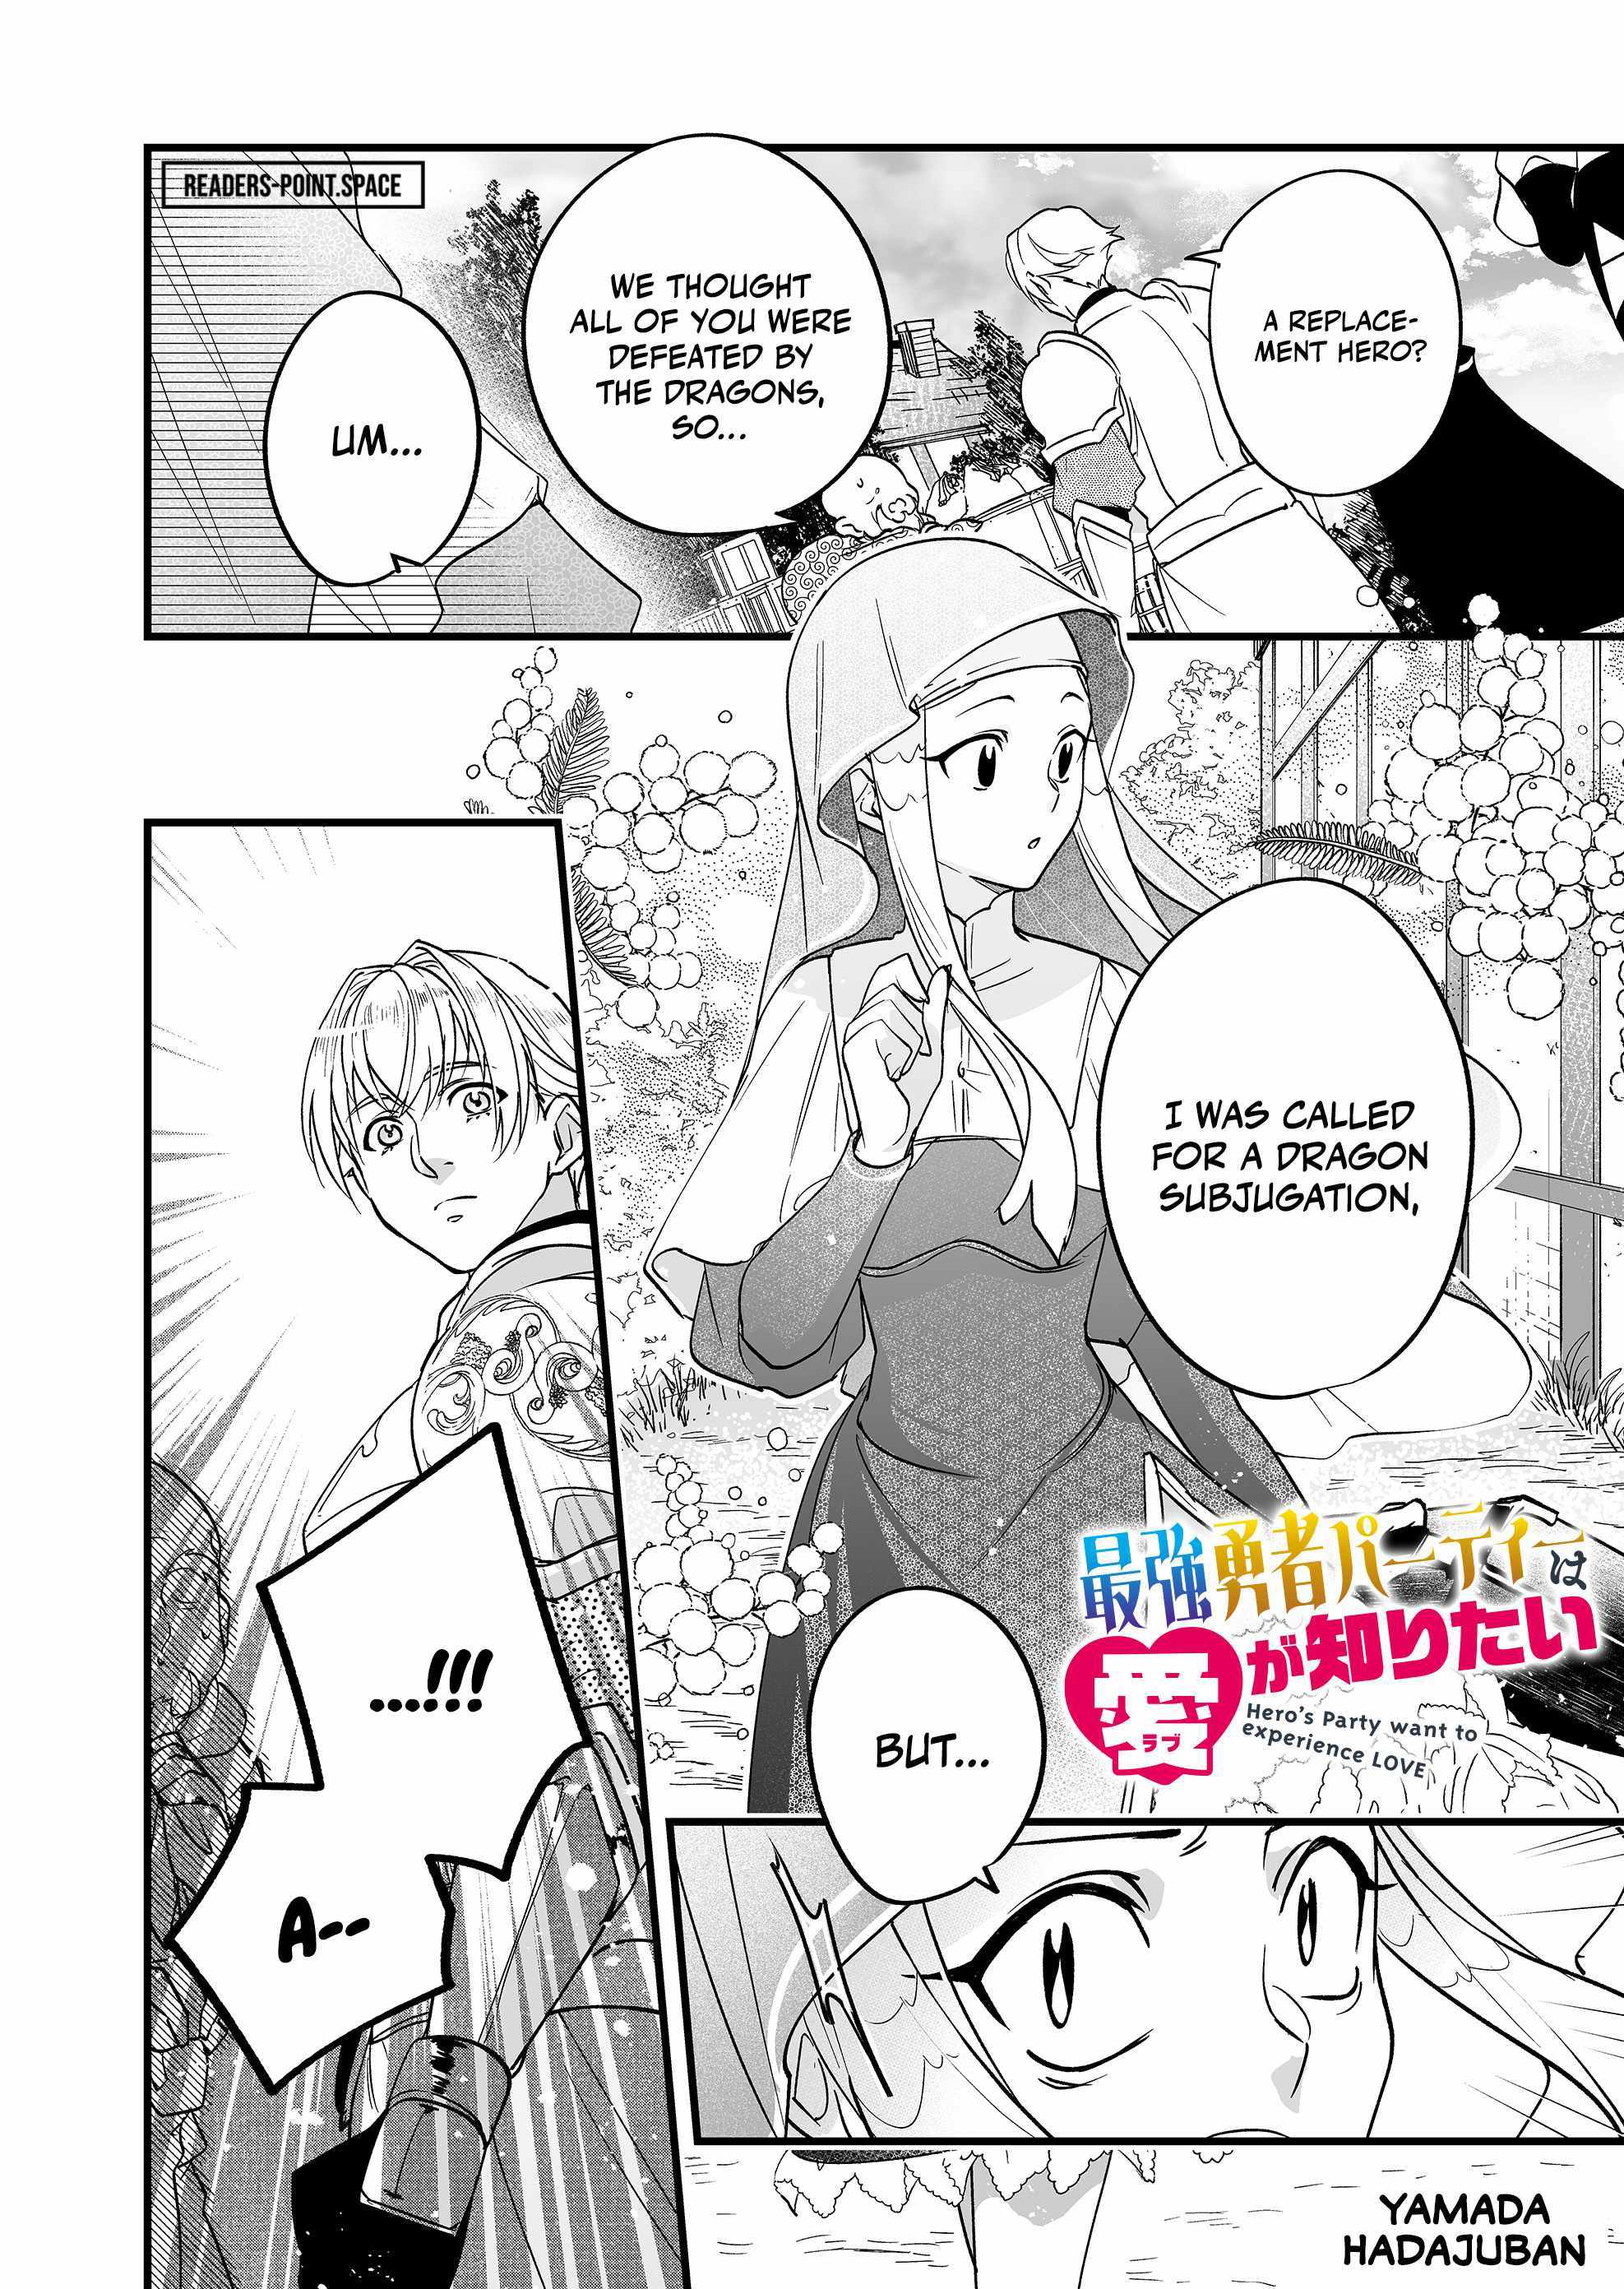 Hero's Party Want To Experience Love - Page 2